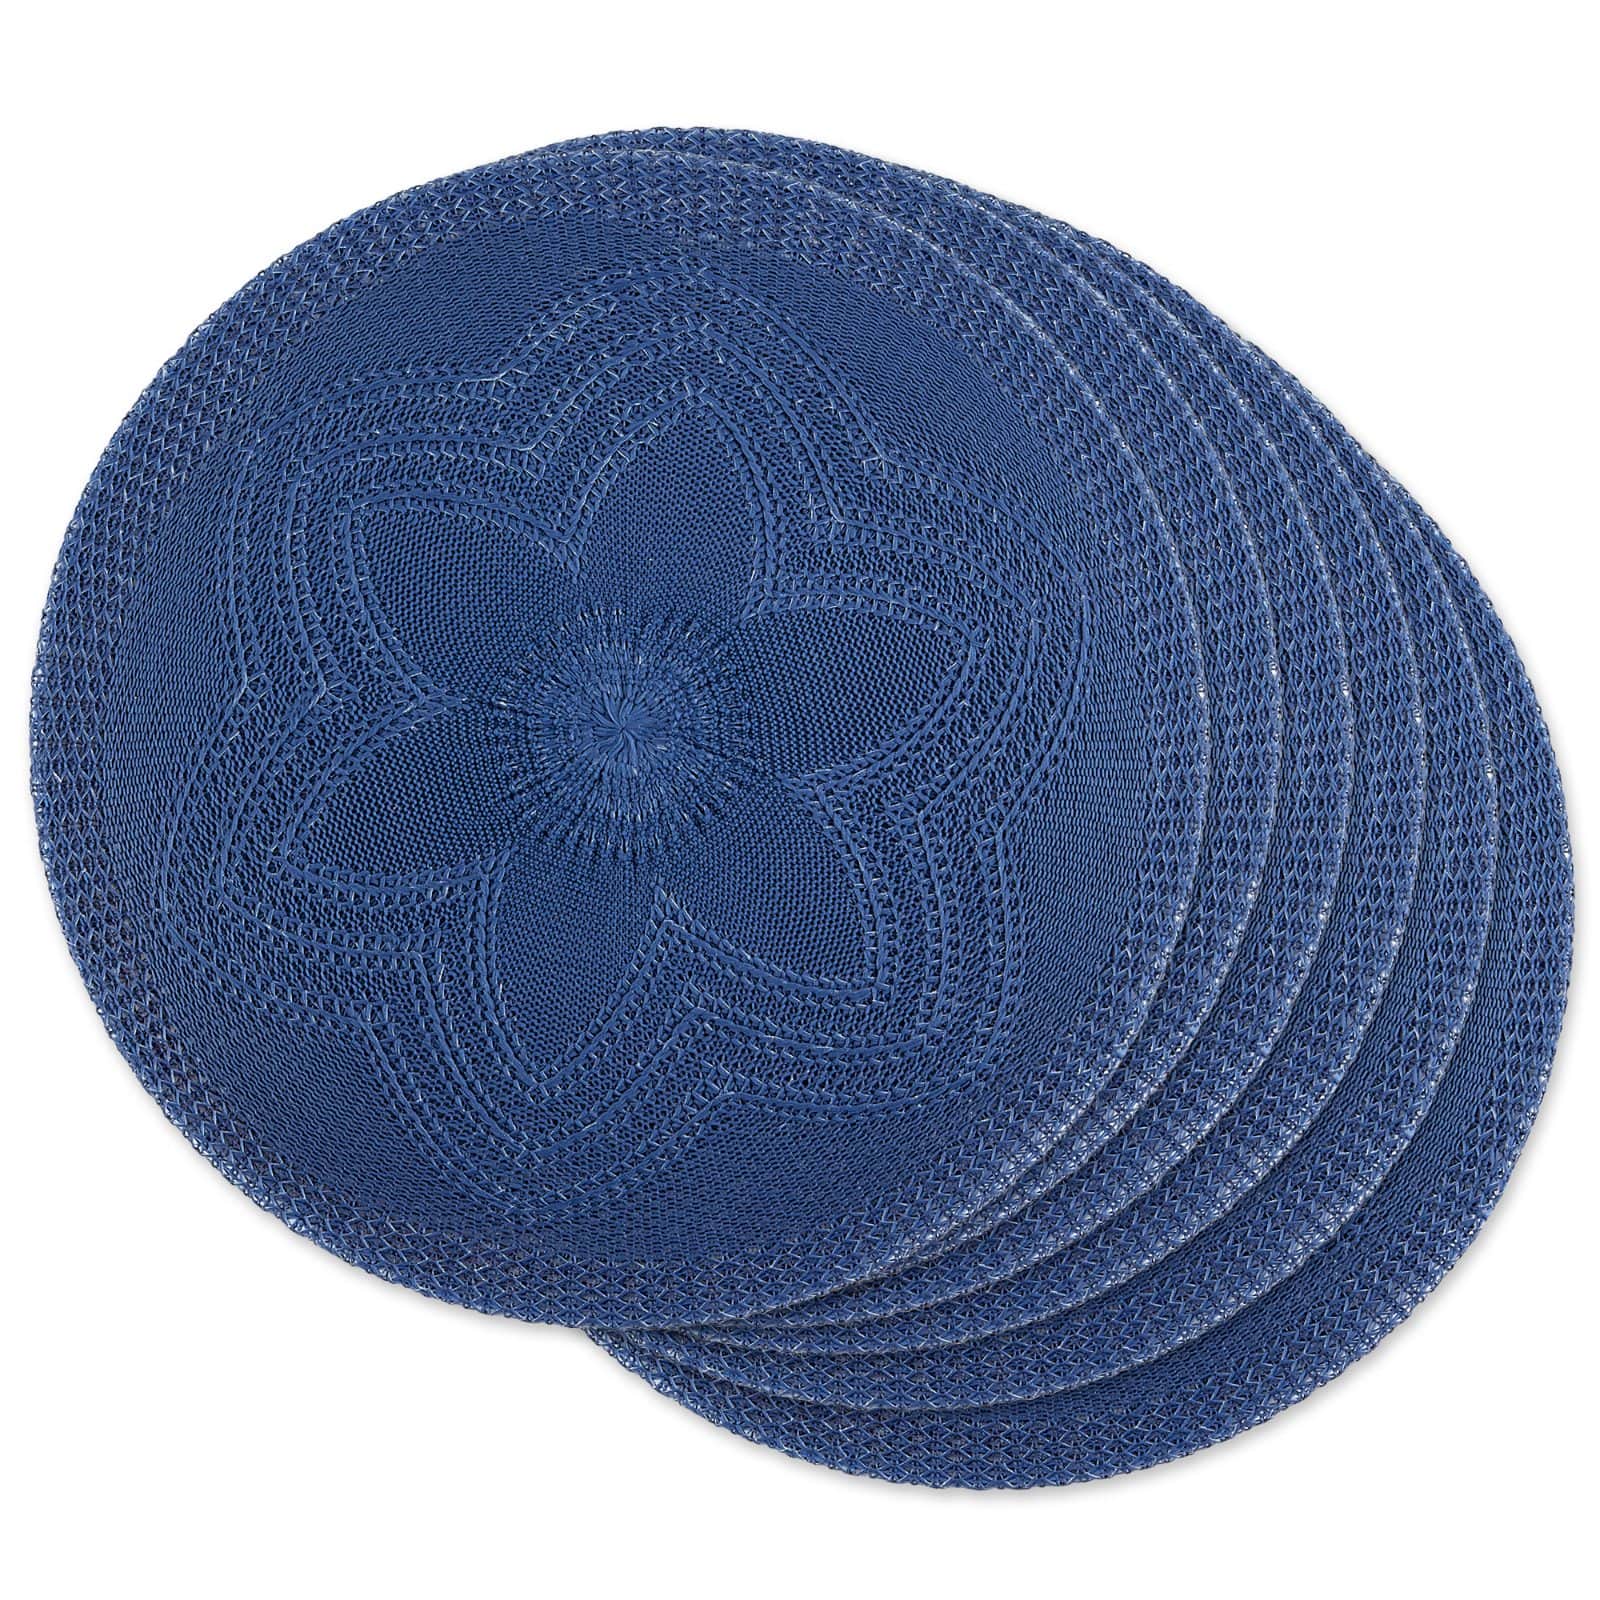 DII® Woven Round Placemats, 6ct.